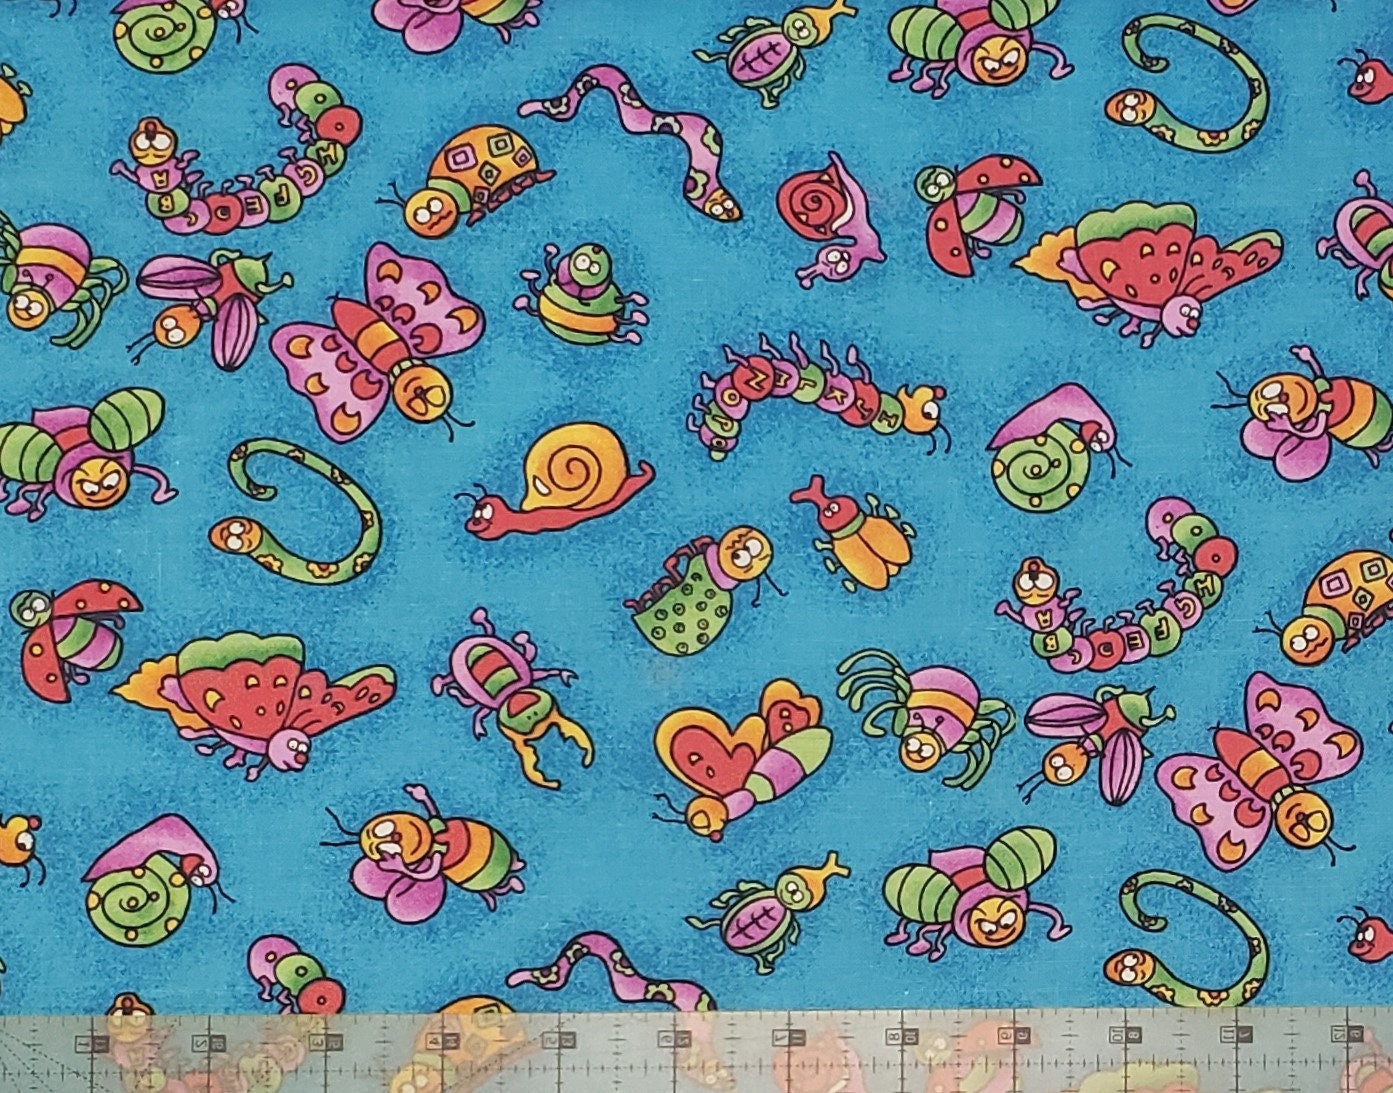 Beth Ann Bruske for David Textiles - Bright Blue Fabric / Vibrant Cartoon-Style Insects